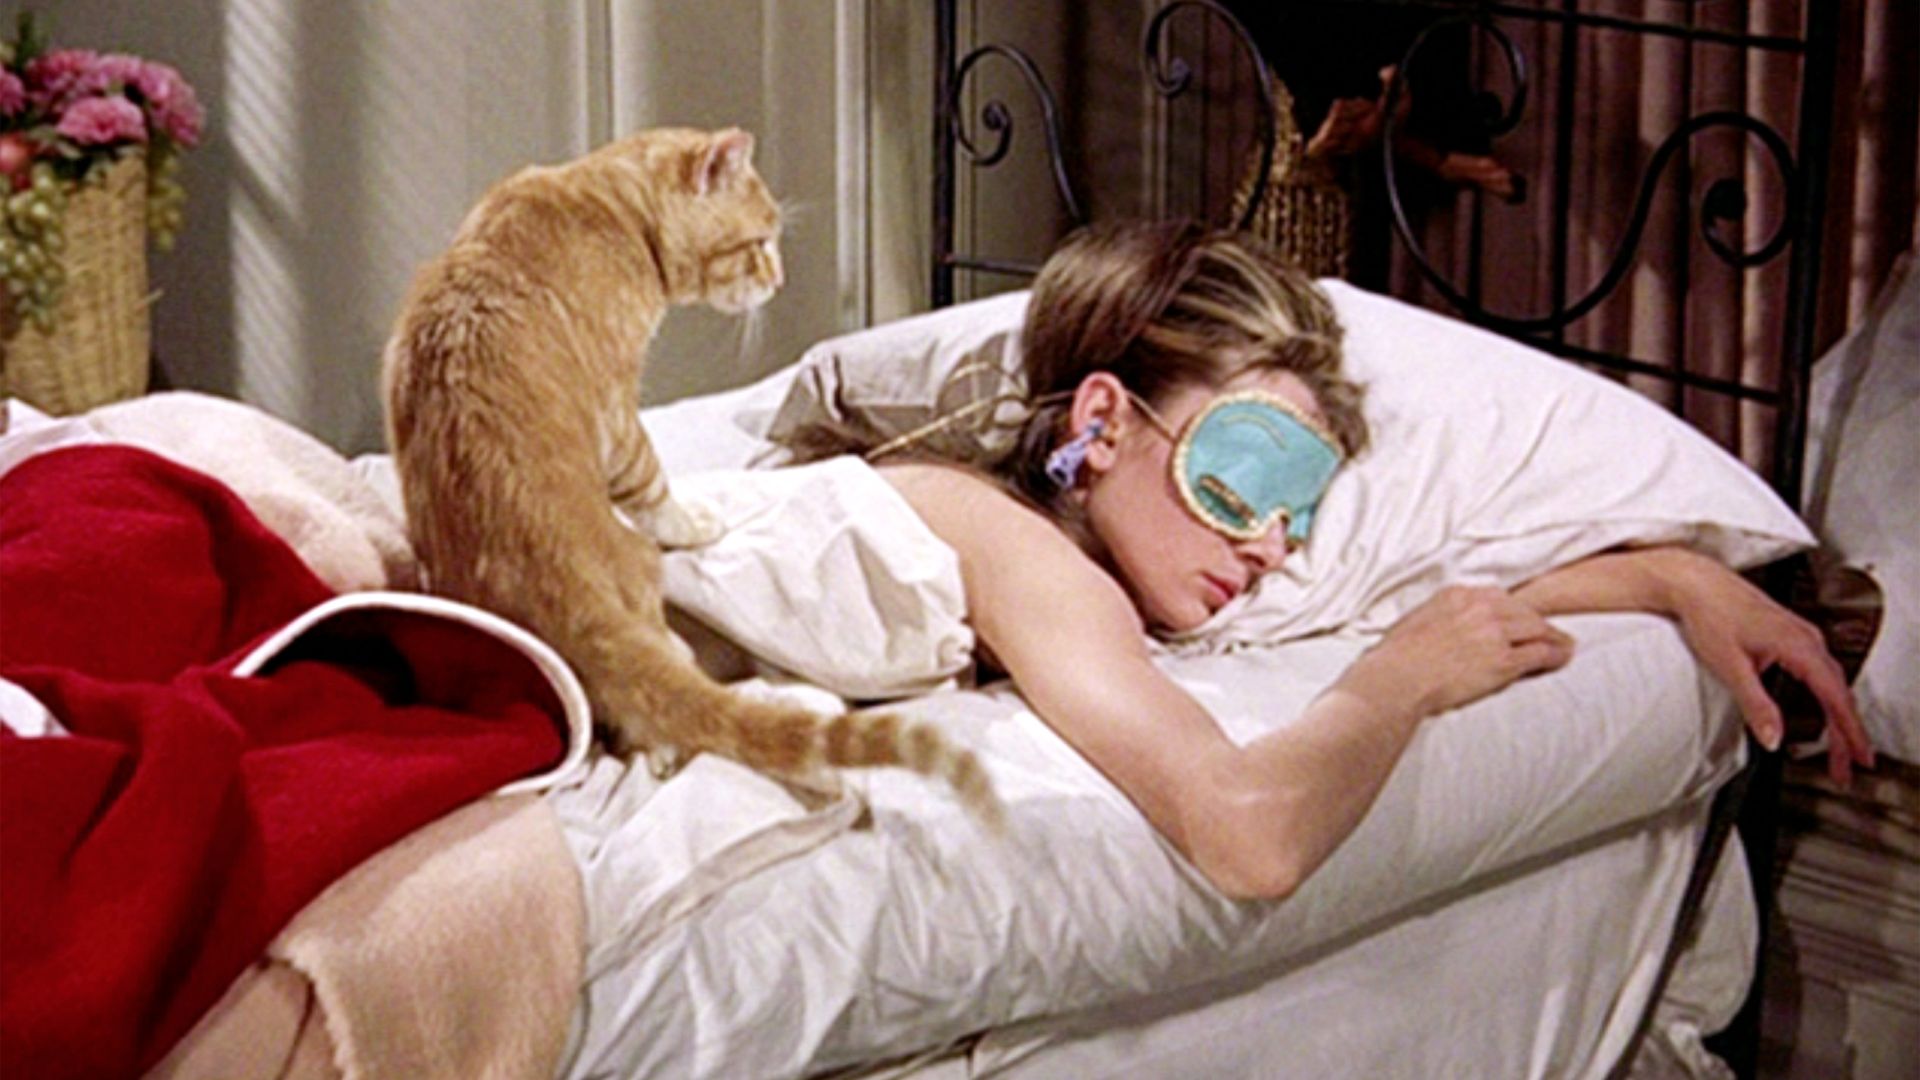 NEW YORK - OCTOBER 5: The movie "Breakfast at Tiffany's", directed by Blake Edwards and based on the novel by Truman Capote. Seen here, Audrey Hepburn as Holly Golightly and 'Cat'. Initial theatrical release October 5, 1961. Screen capture. Paramount Pict